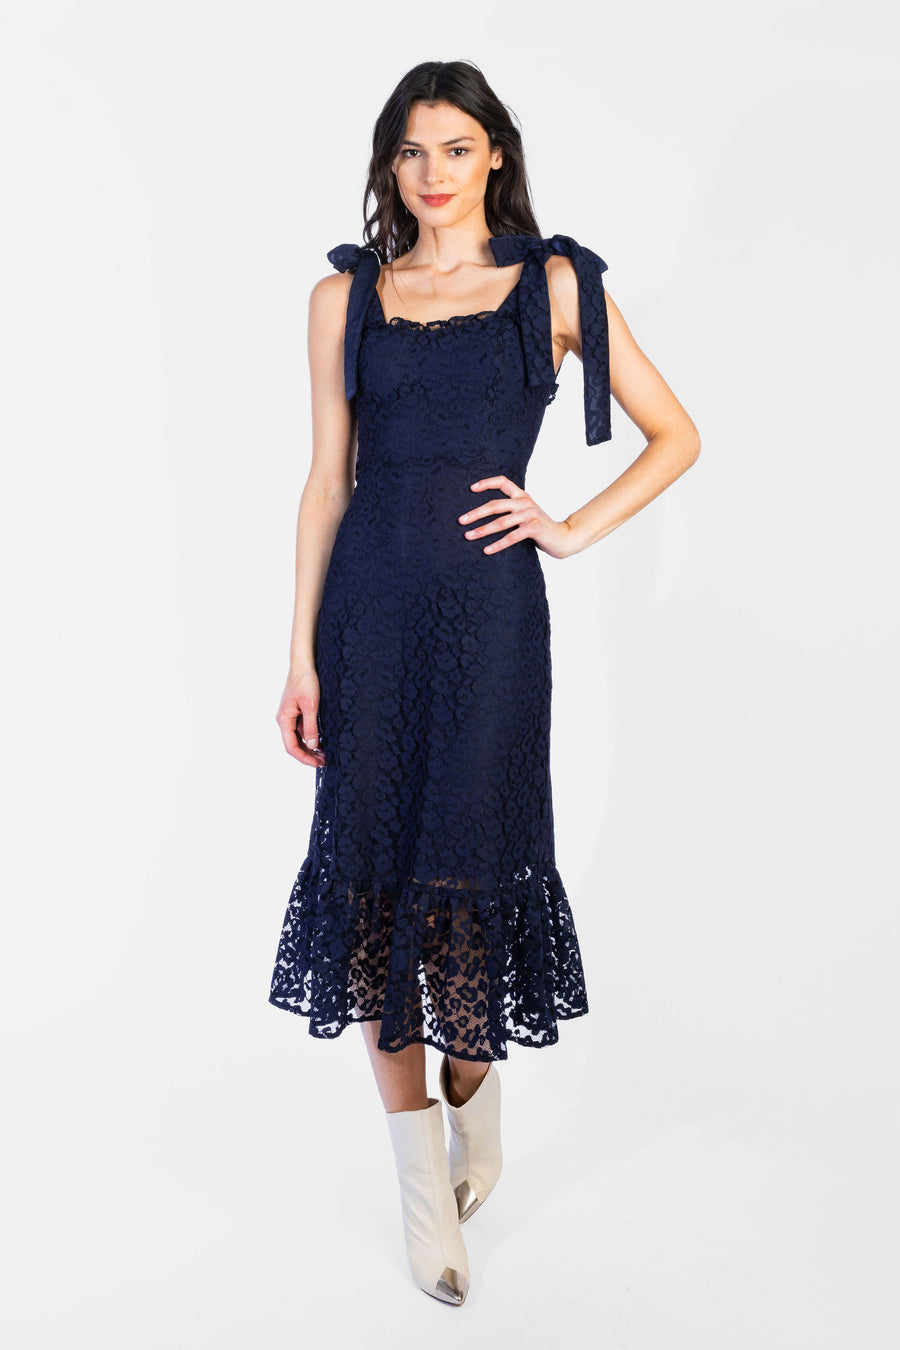 Meredith Dress Midnight Lace *Limited*Edition*